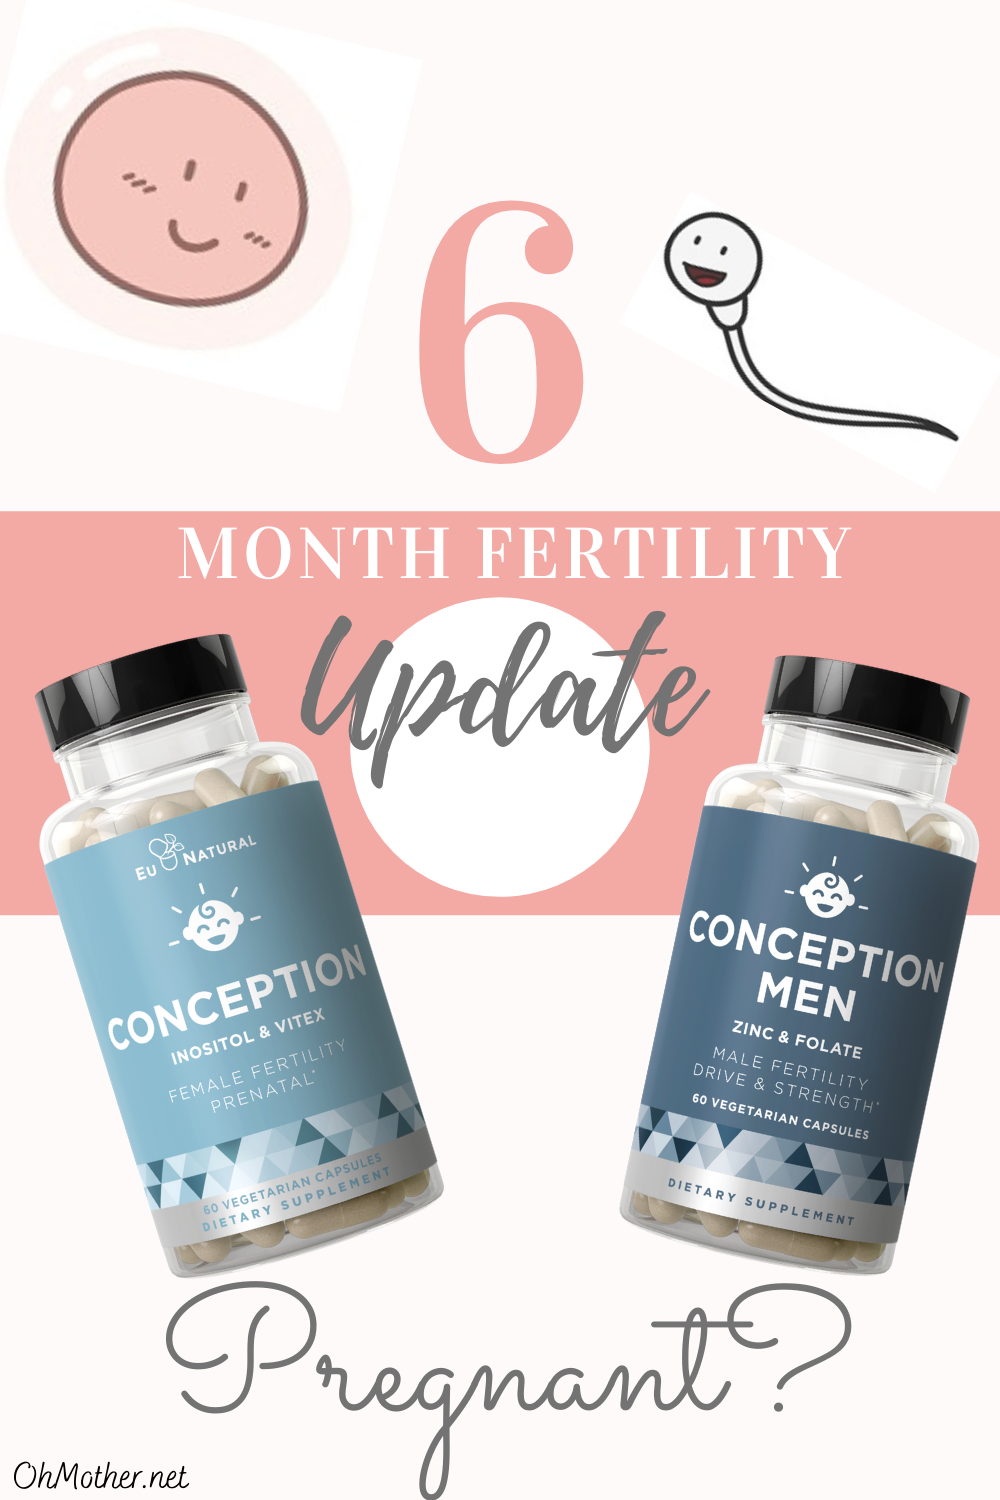 Conception and Conception Men vitamin bottle. Sperm and egg image